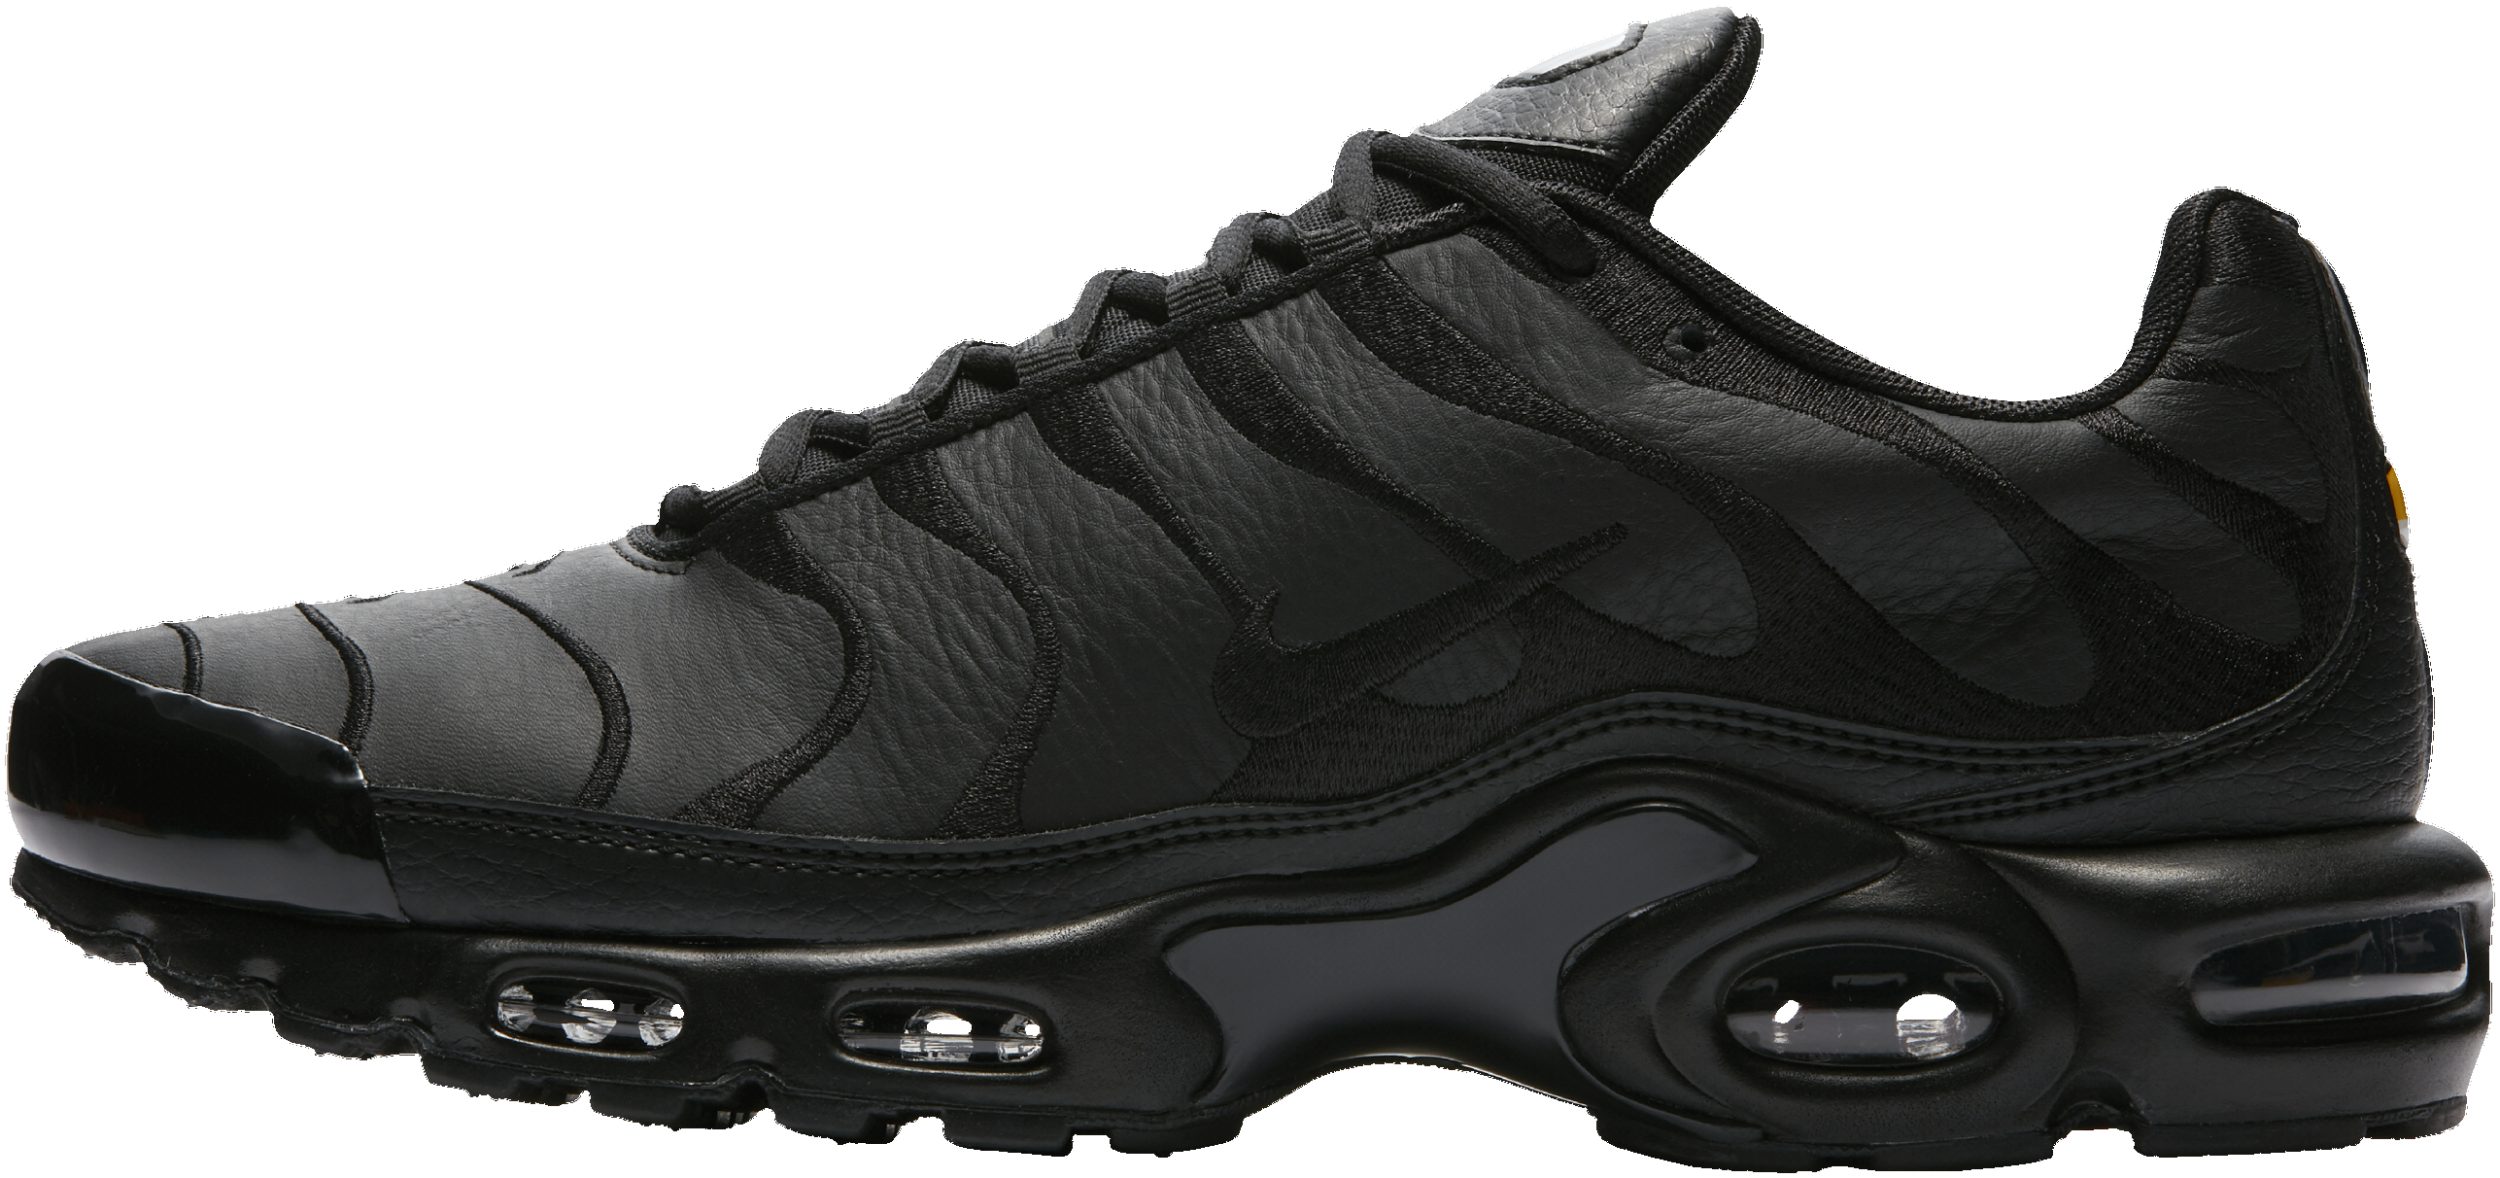 hire specification Apt 60+ colors of Nike Air Max Plus (from $141) | RunRepeat